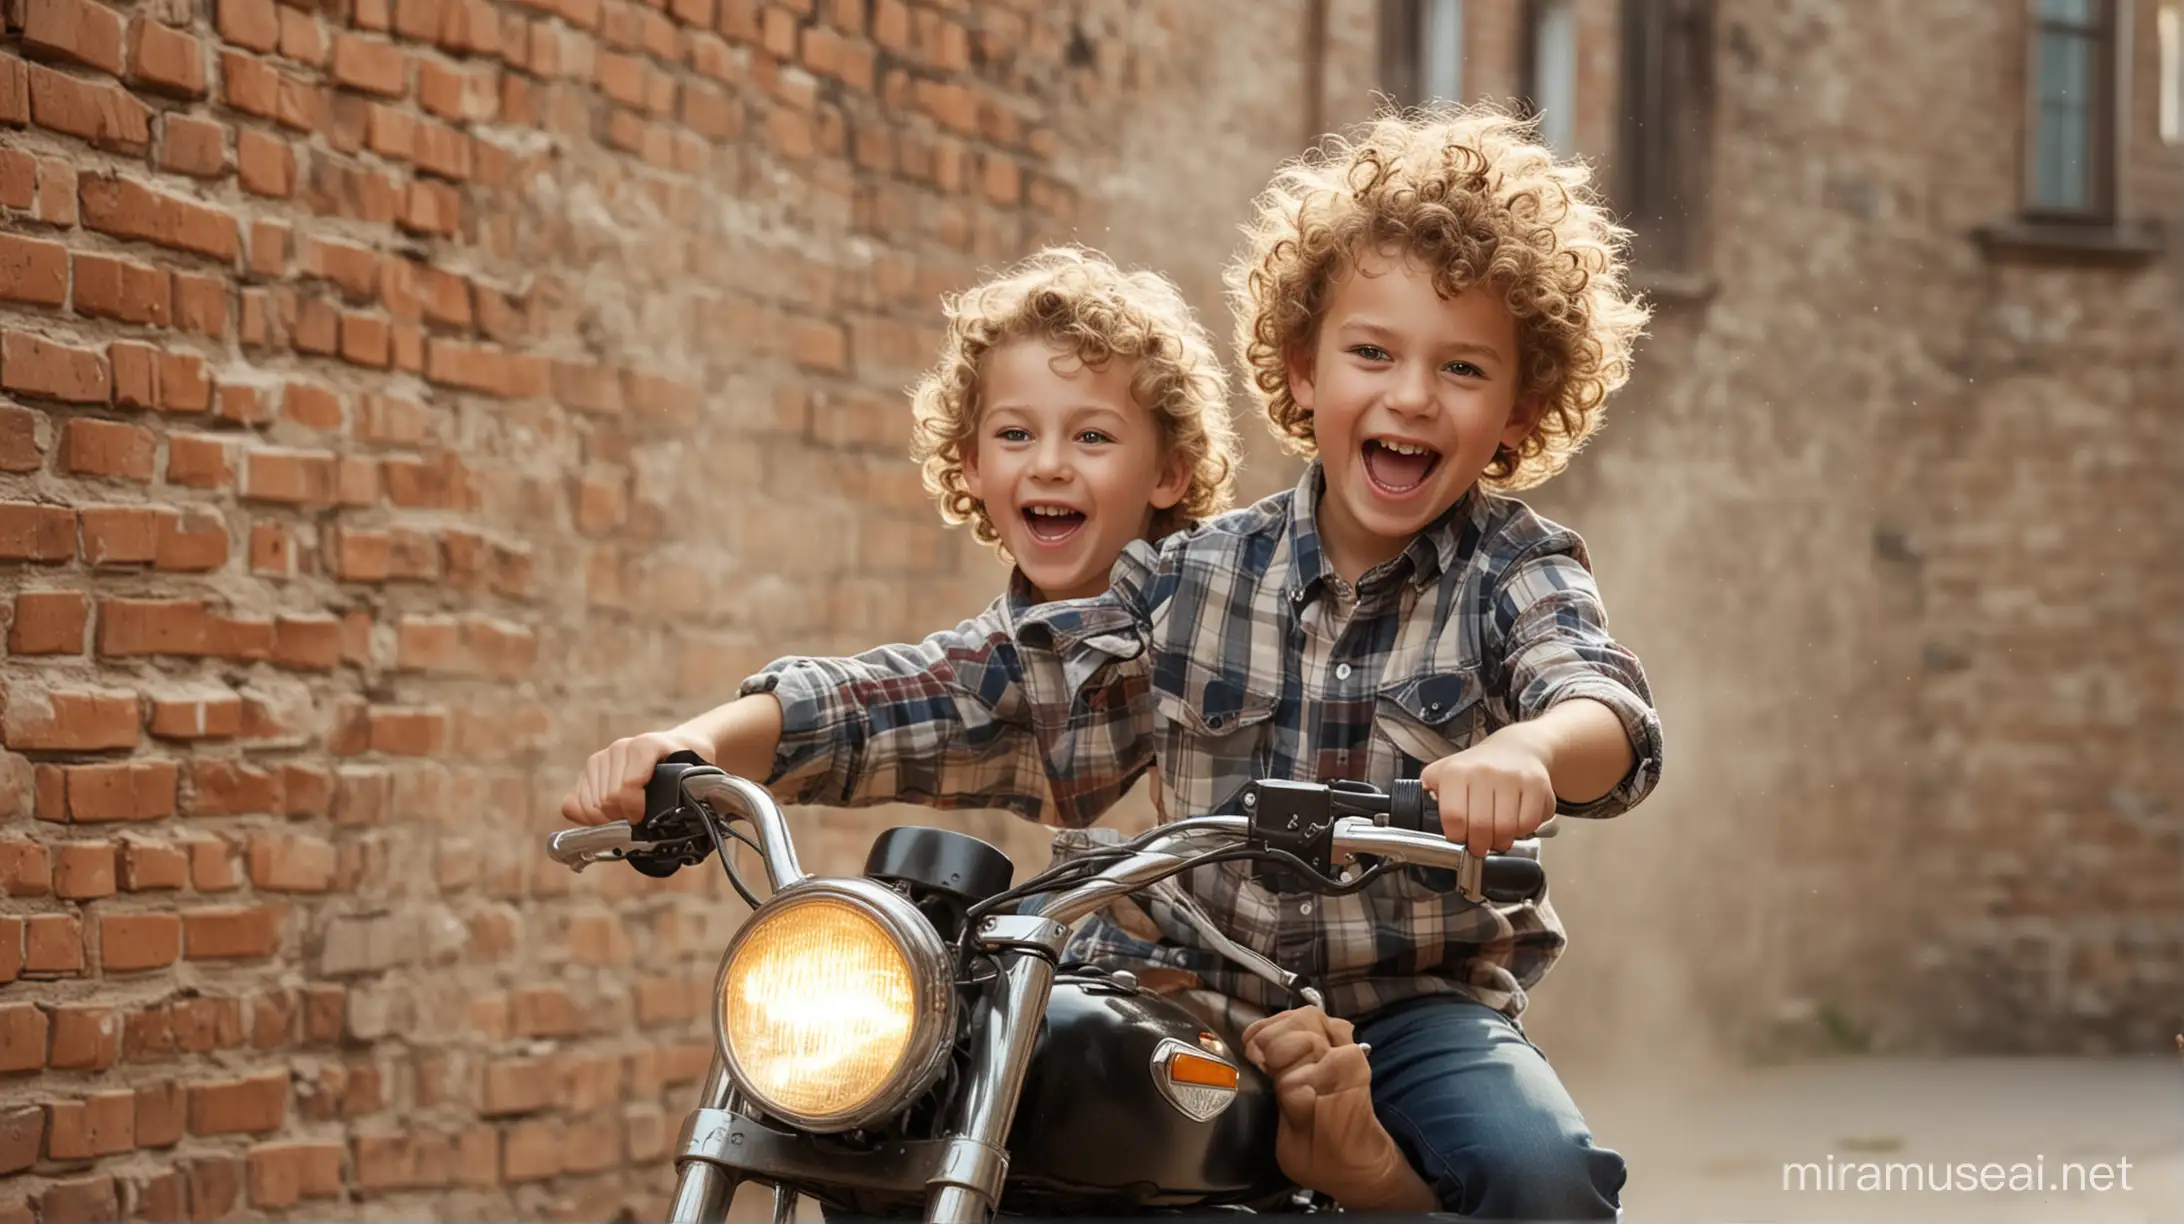 a happy little fair-haired boy with curly hair on a motorcycle at full speed blows up a brick wall